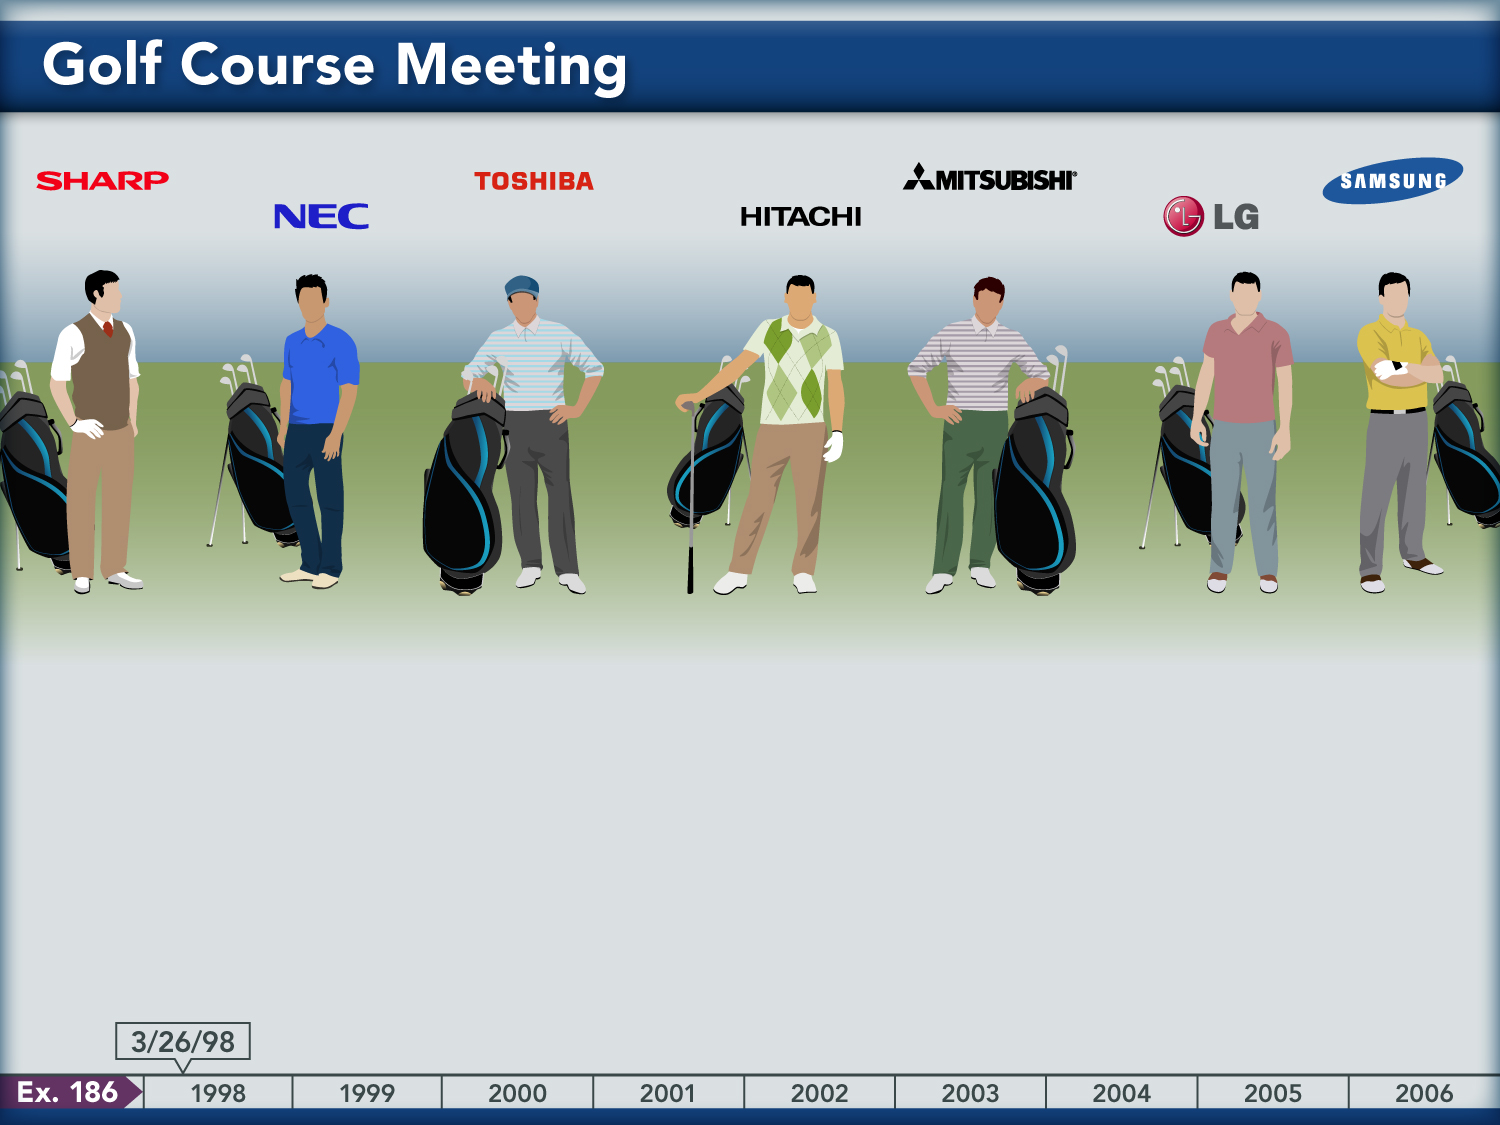 Golf Course Meeting, Illustration of 7 men golfers with clubs